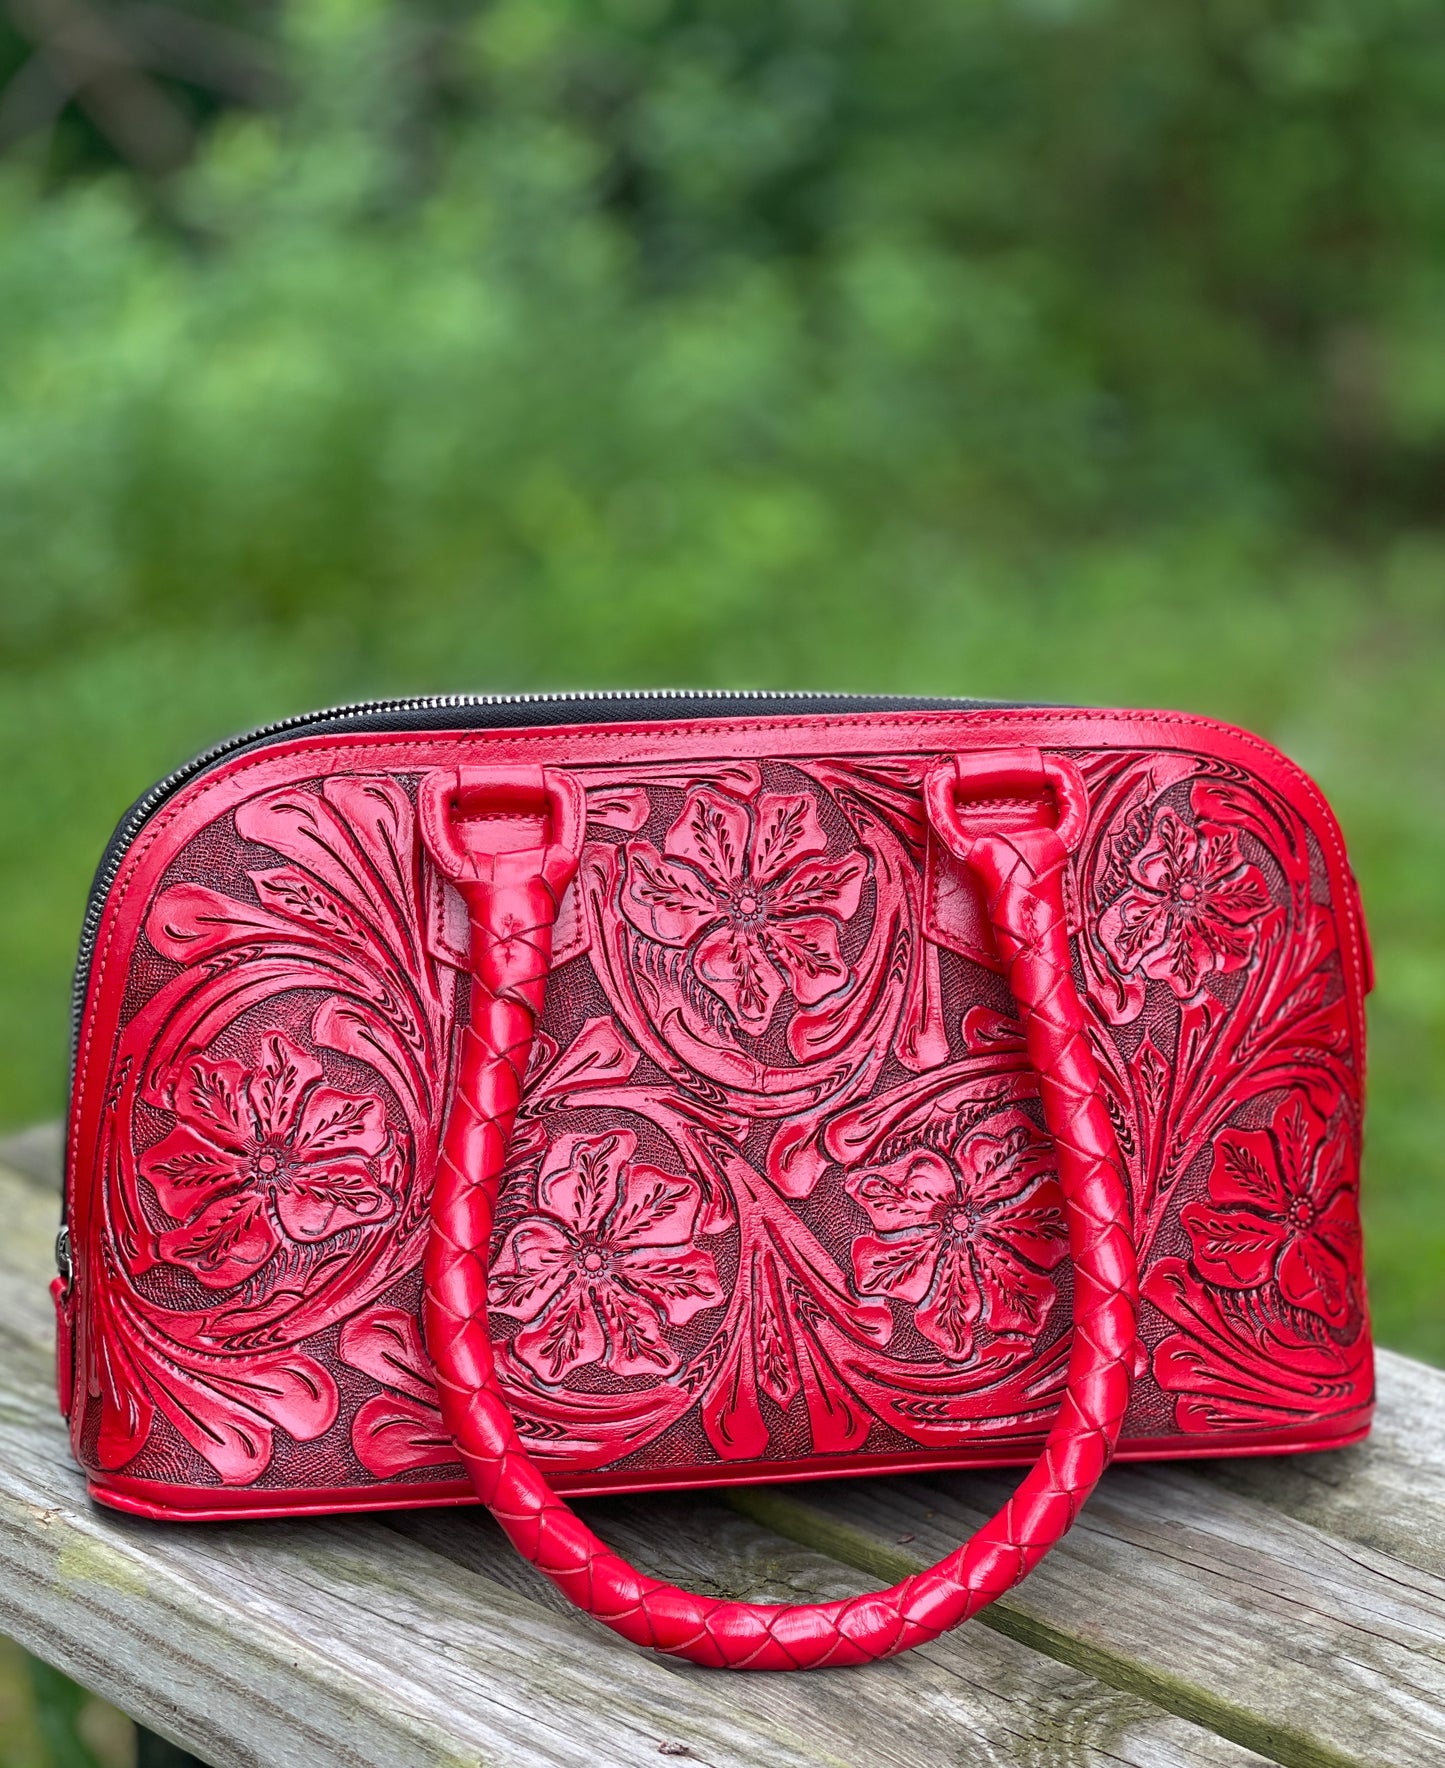 Hand-Tooled Leather Small Doctor Bag "MALETIN", more Colors - ALLE Handbags